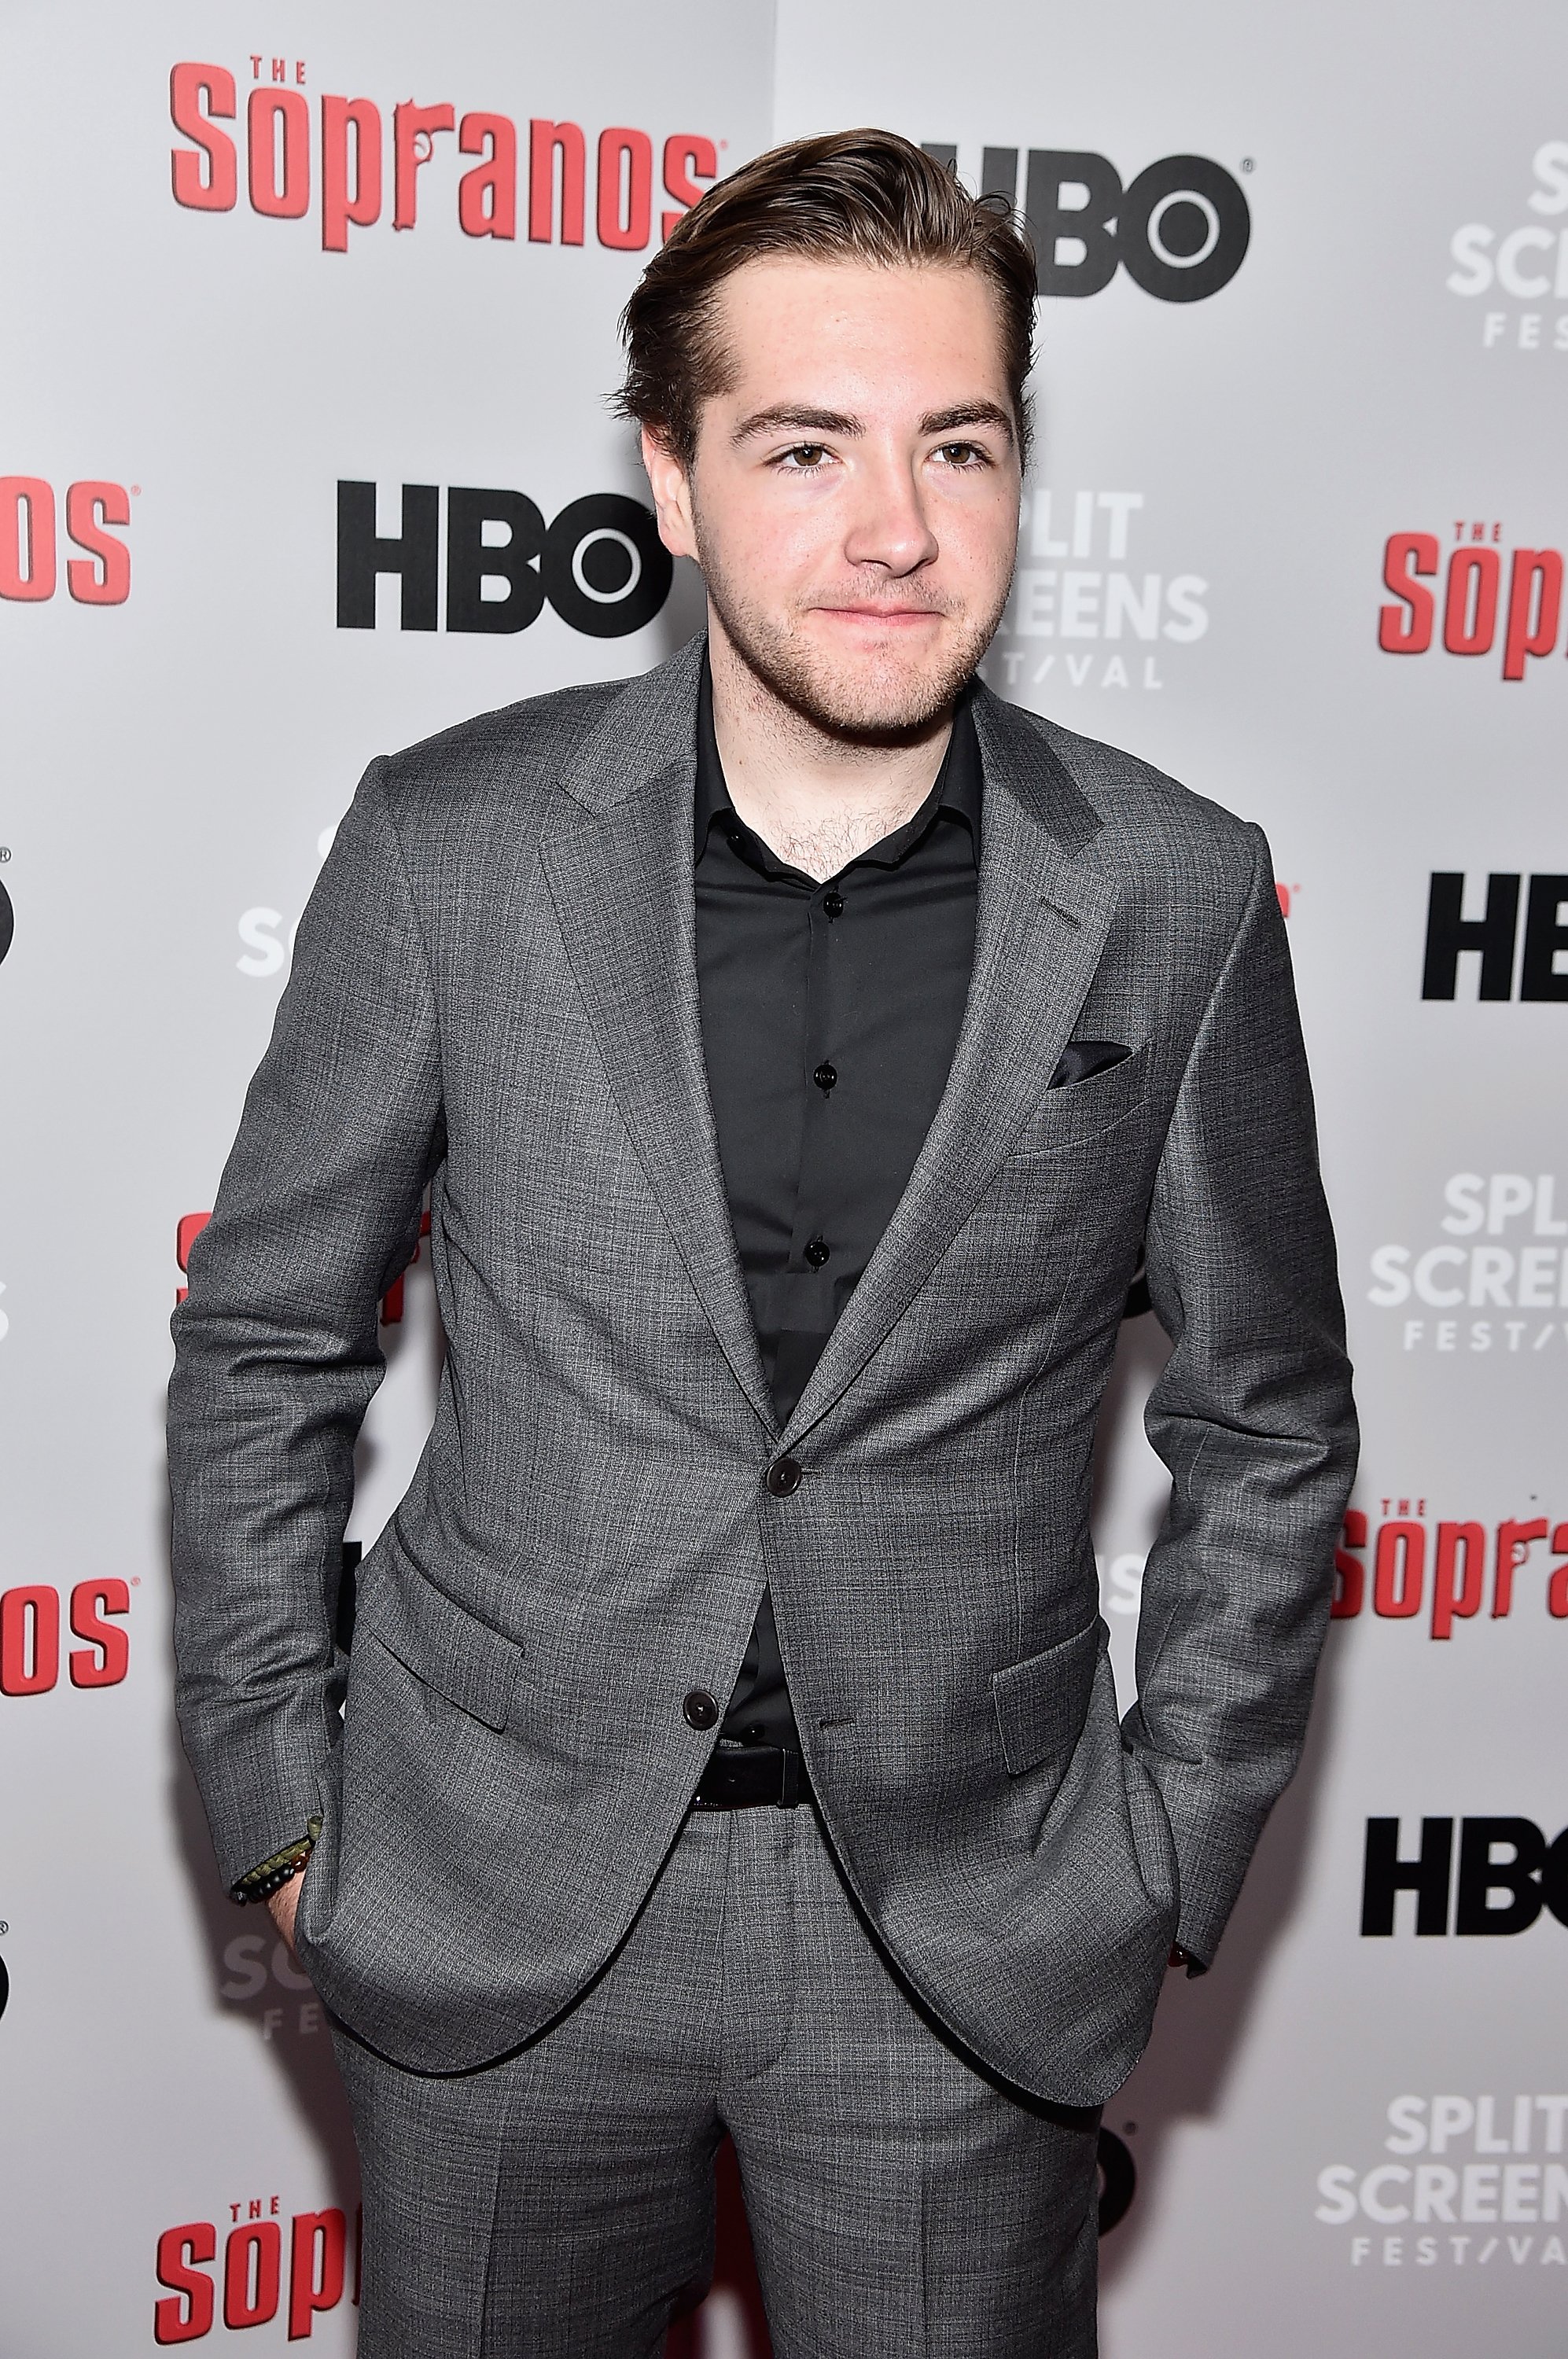 The 19-year-old Michael Gandolfini is set to follow in his father's footsteps. Image credit: Getty/GlobalImagesUkraine